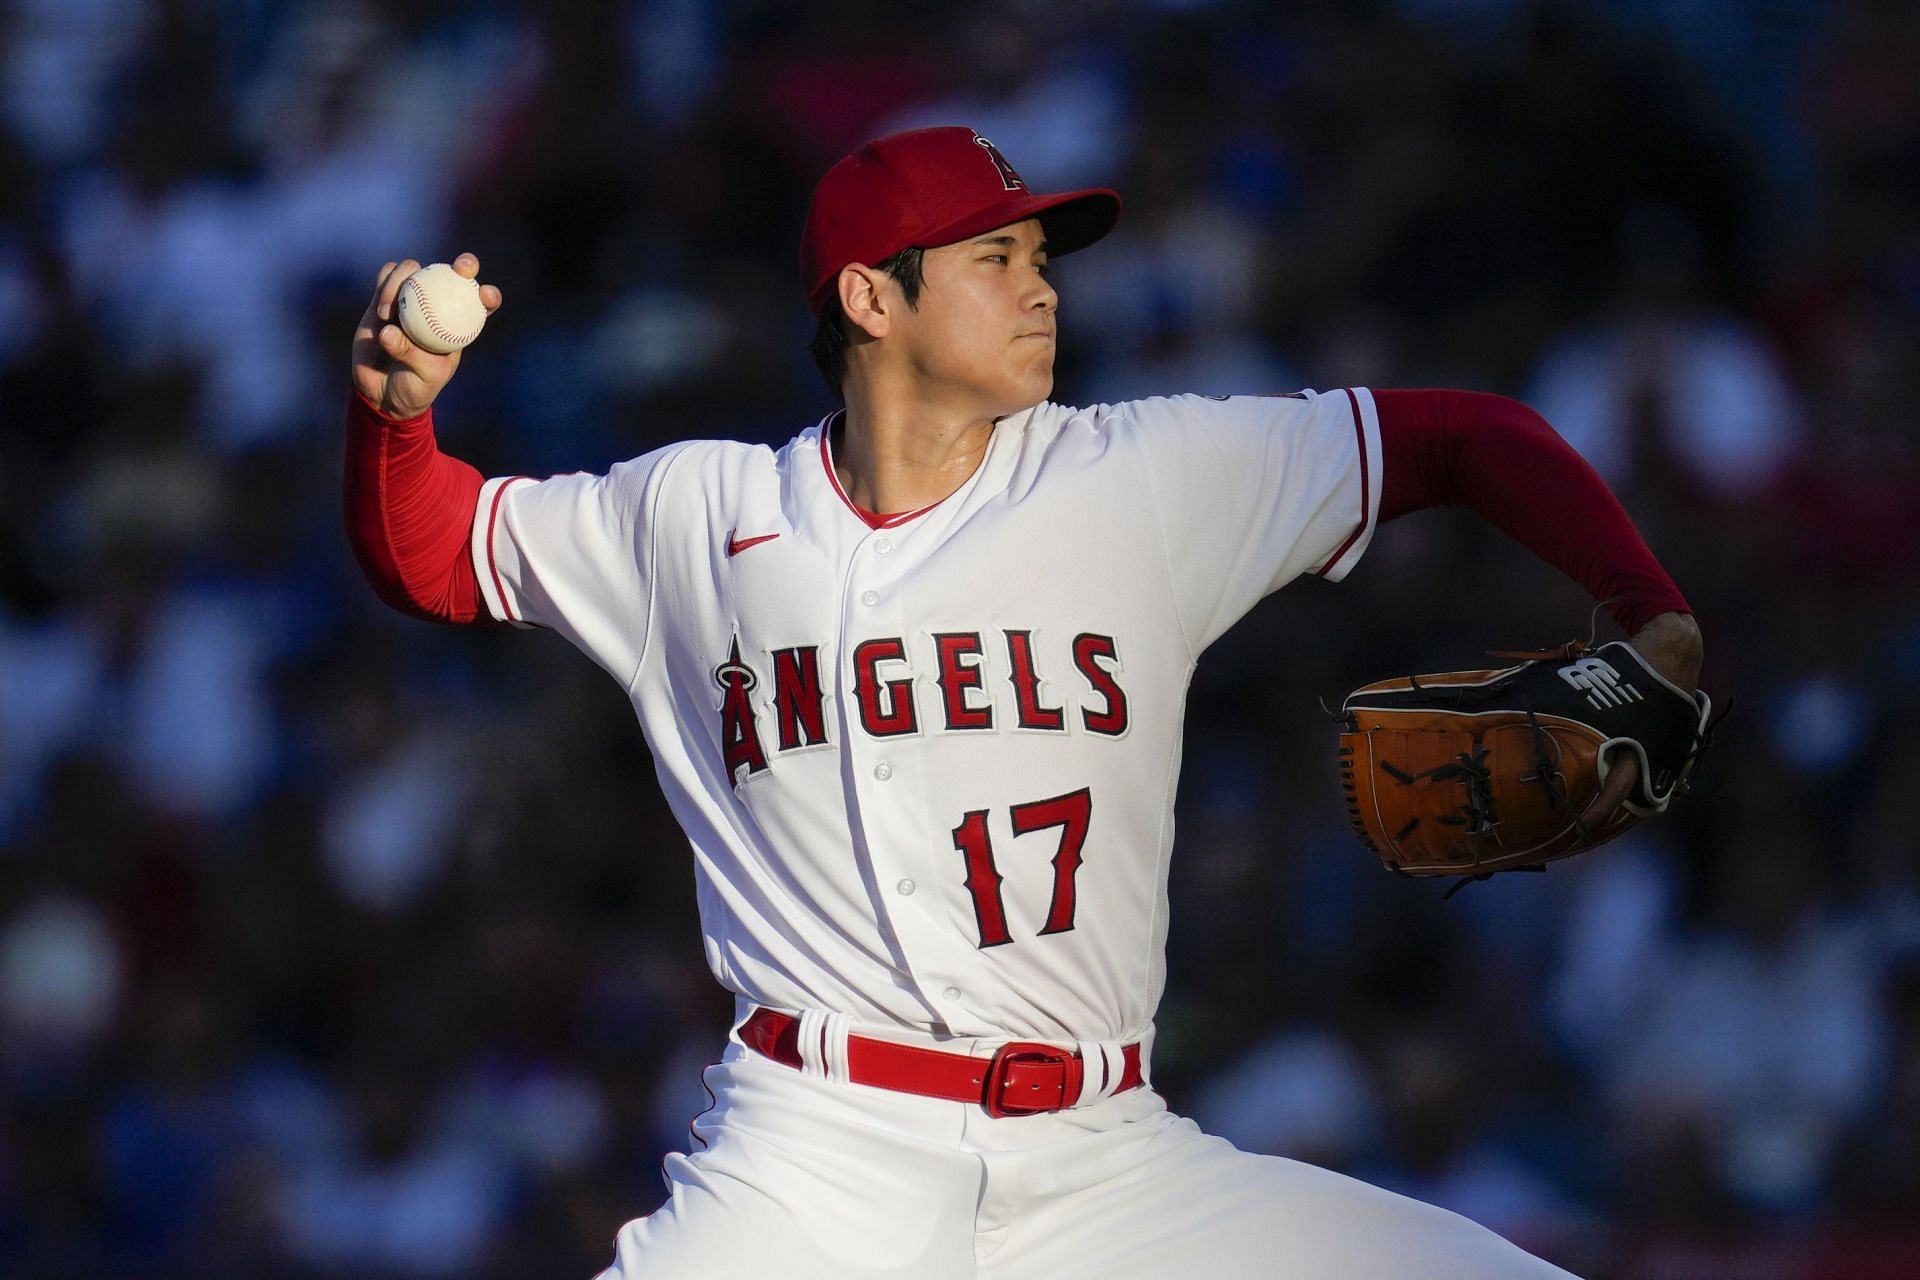 Shohei Ohtani broke records with his contract